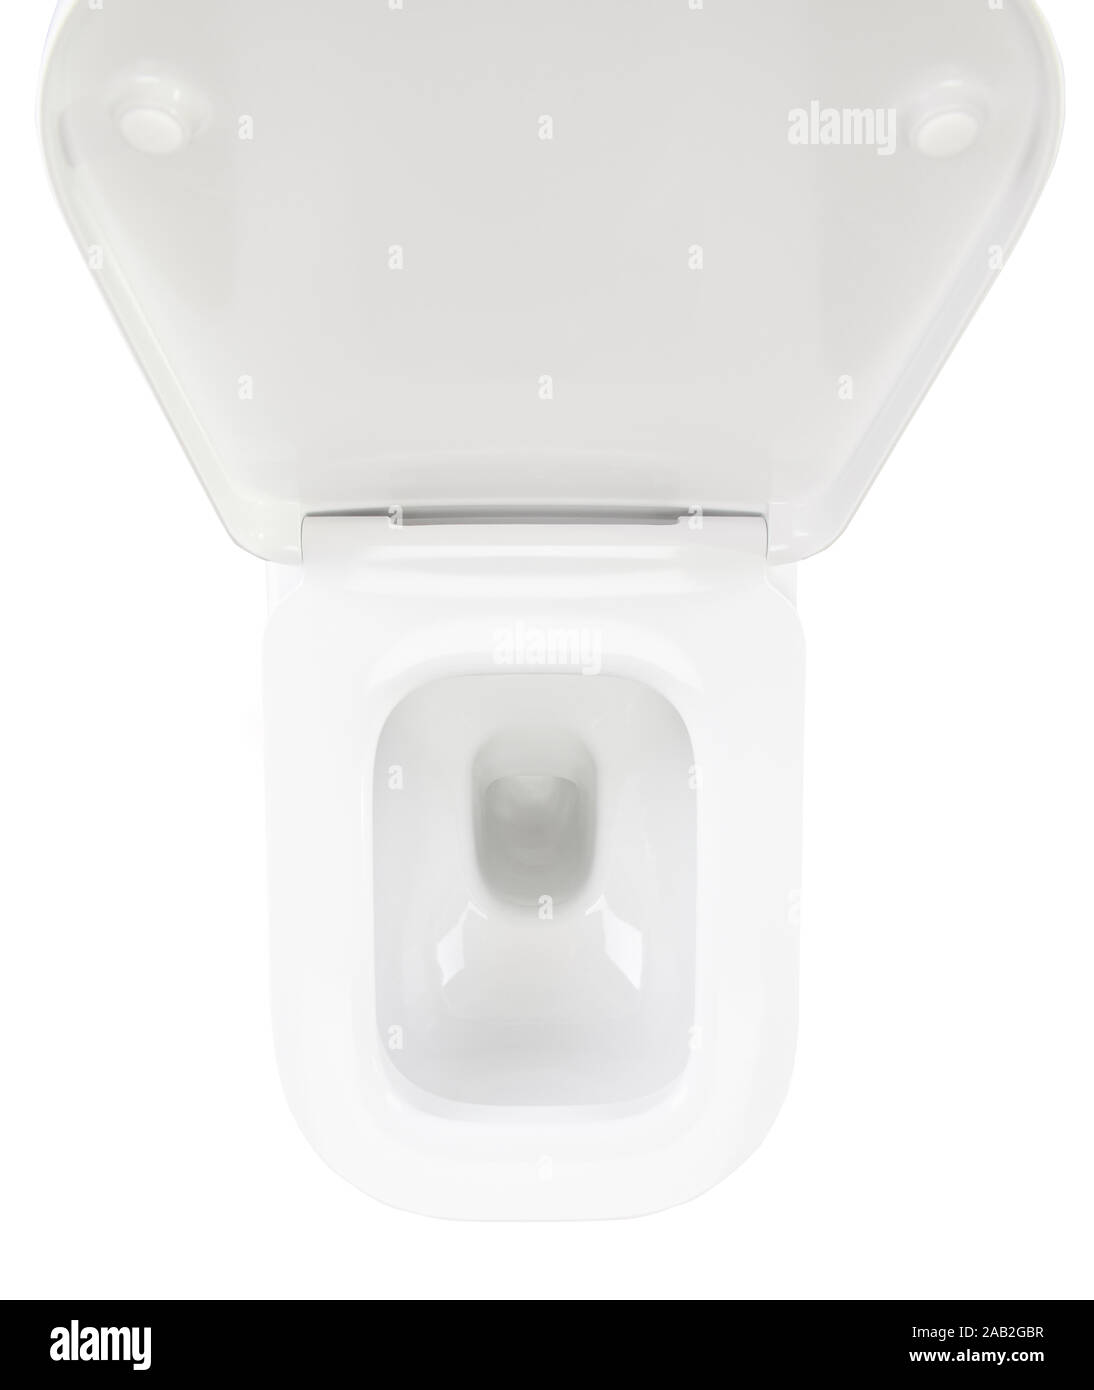 Clean white plastic modern toilet abvoe top view isolated on white background Stock Photo